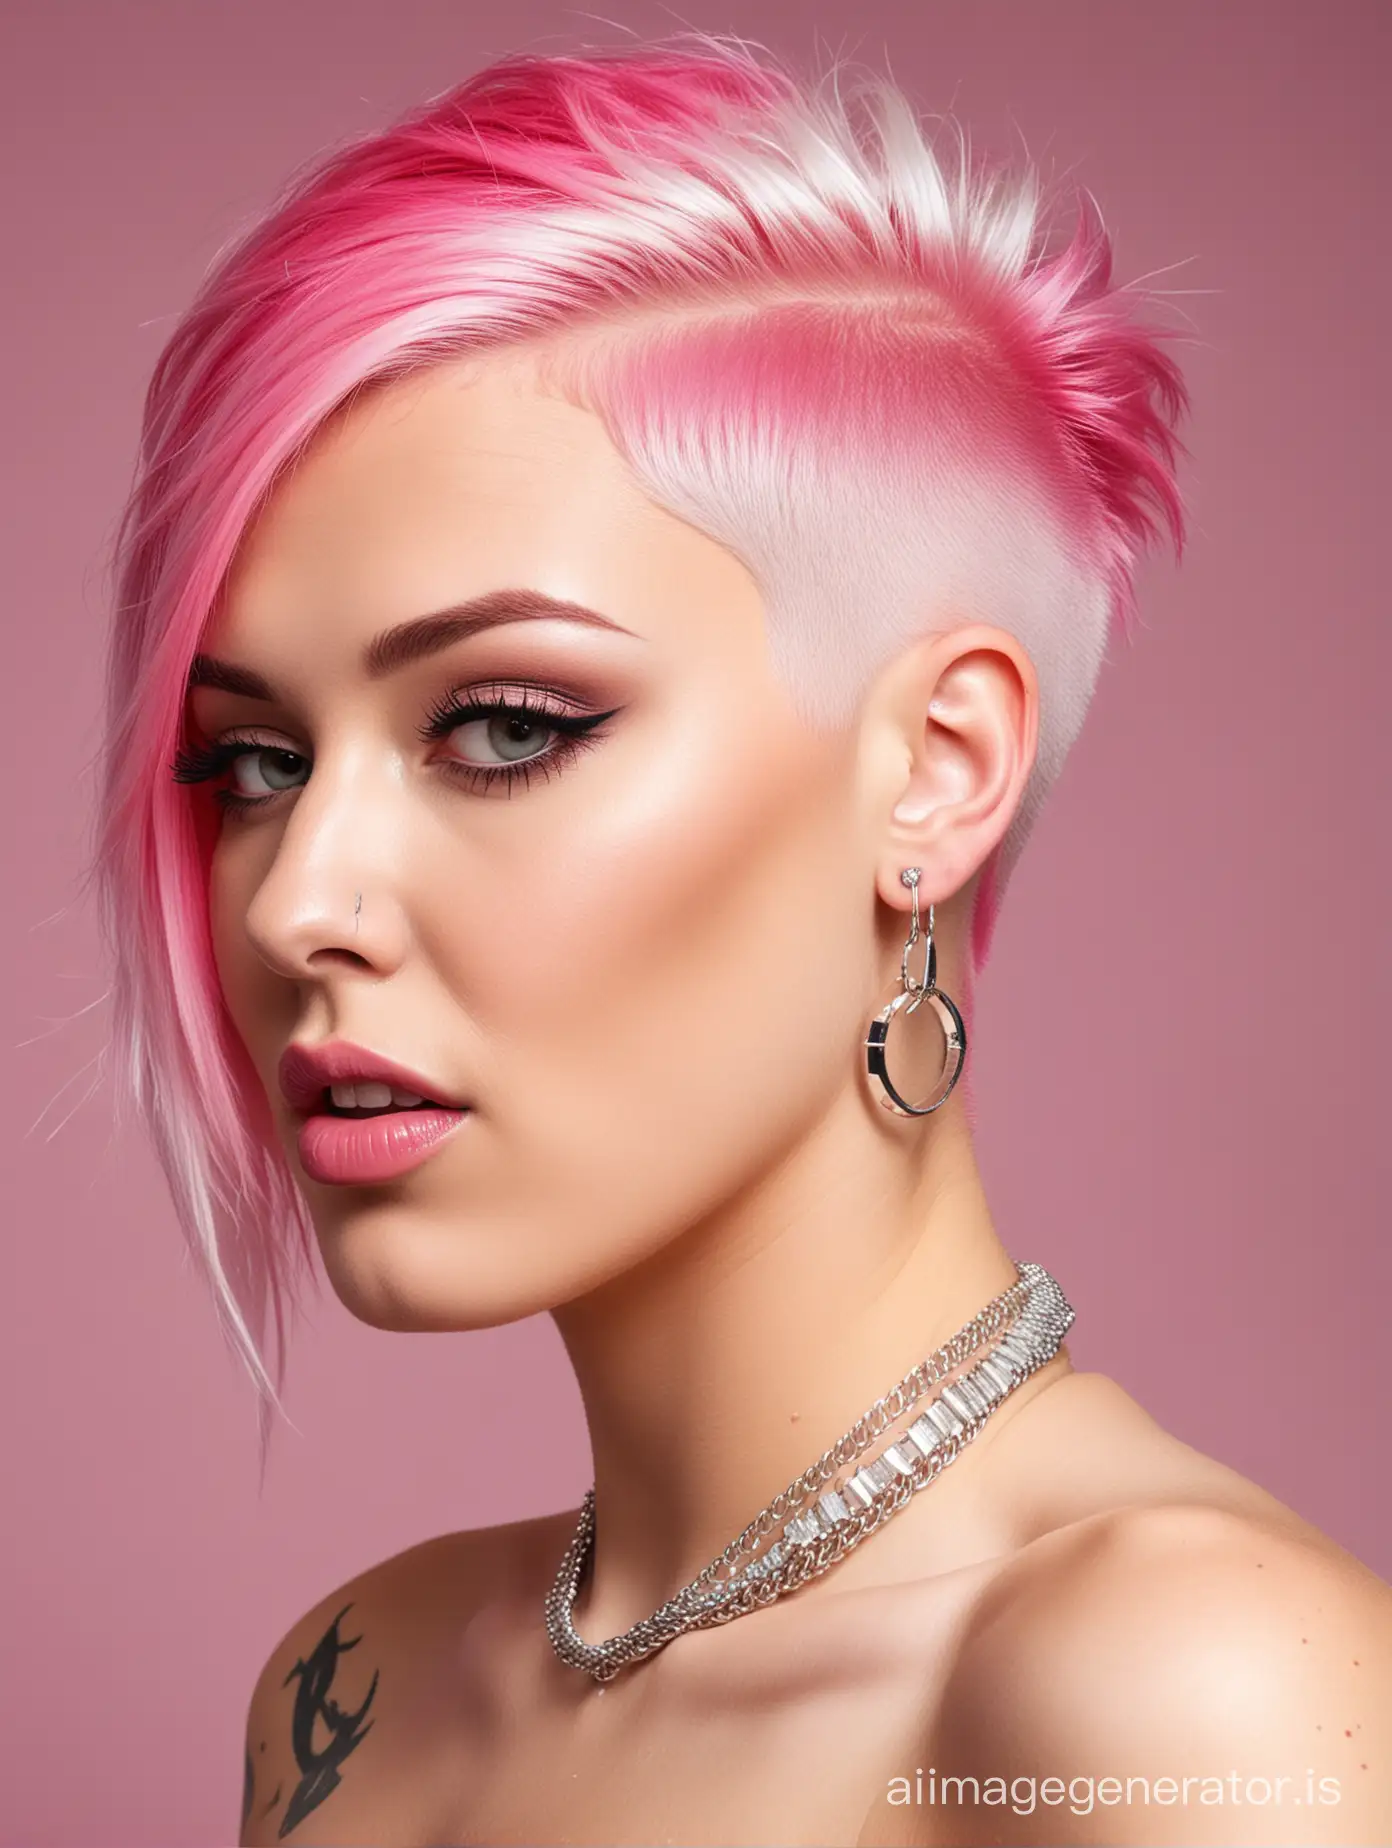 porn star with assymetric hairstyle dyed bright pink and bleached white in a shaved side and nape undercut hairstyle. She has multiple ear piercings with a nose ring. She has large breast implants and is naked.